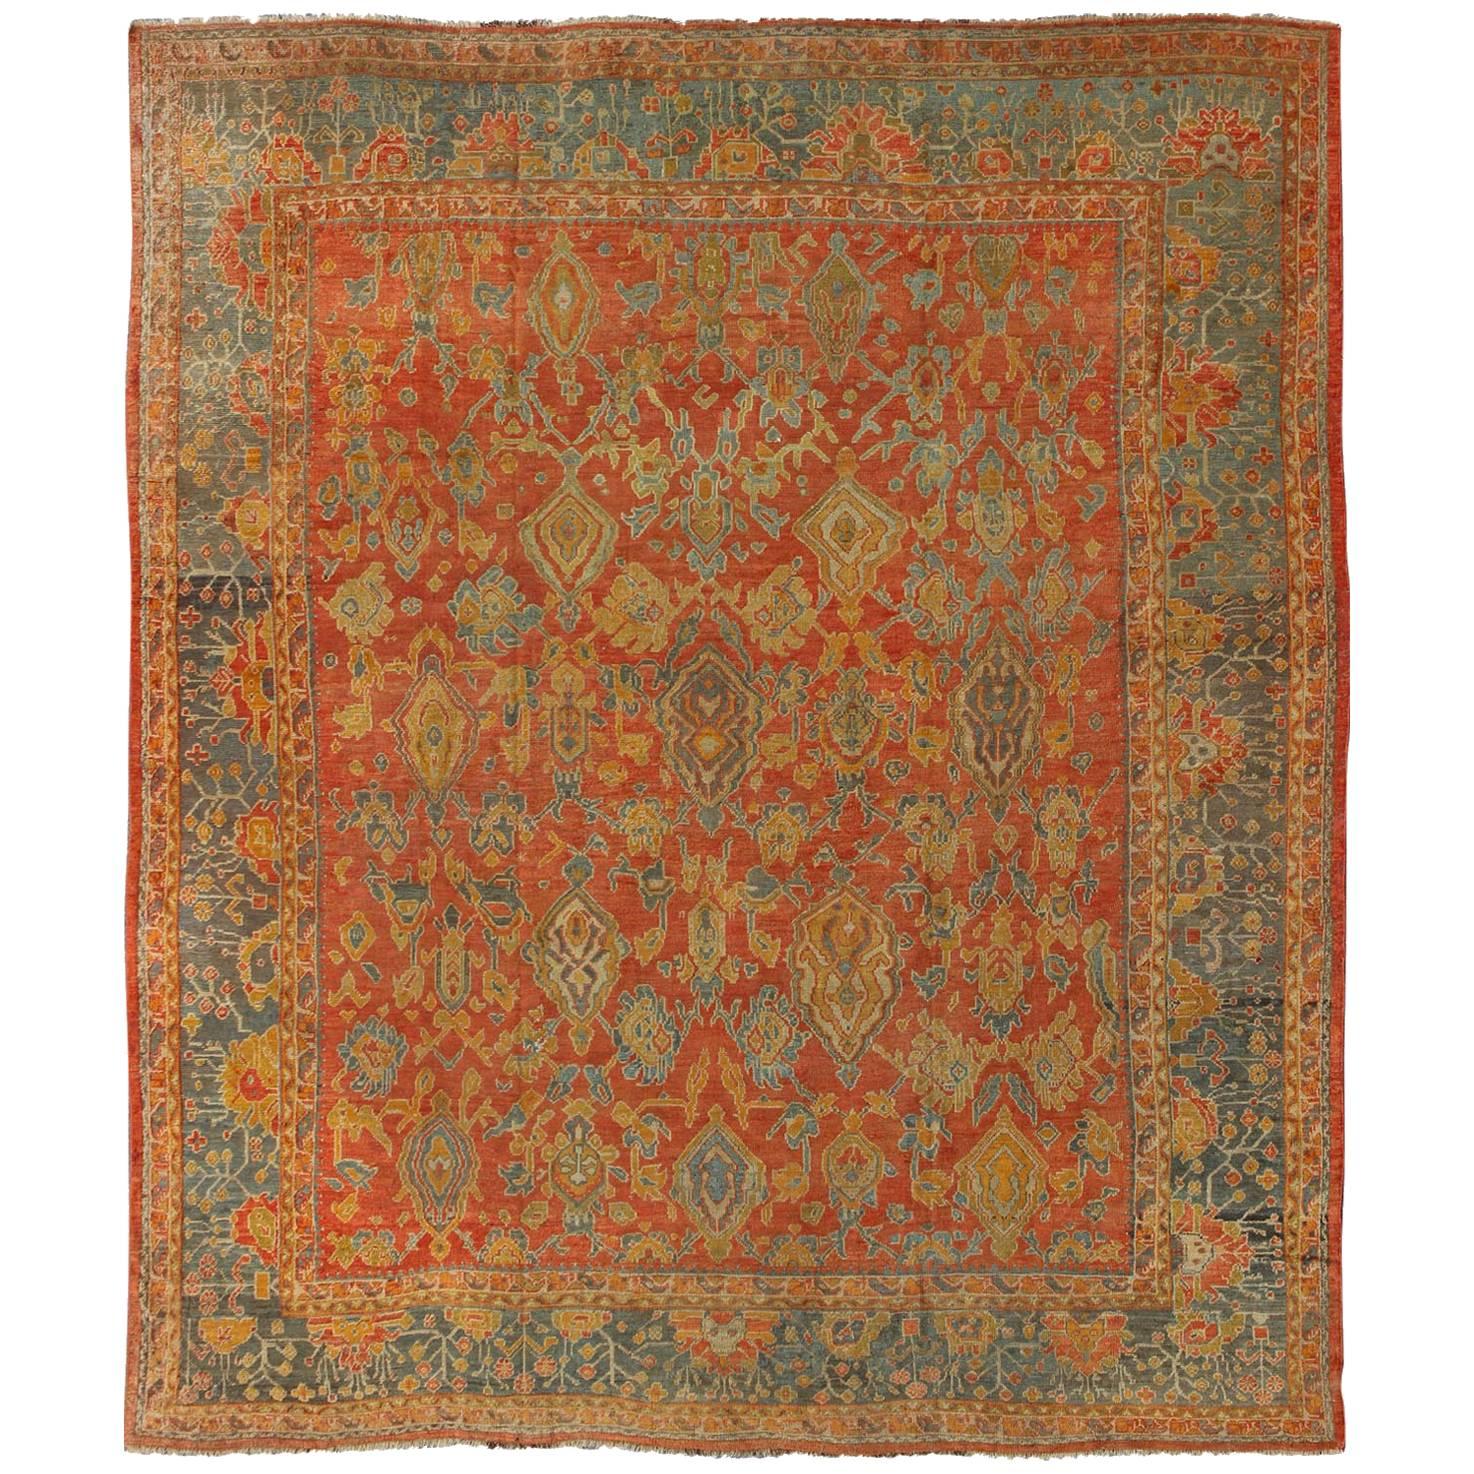 Antique Turkish Oushak Rug in Terracotta With All-Over Flower, Leaves and Vines 